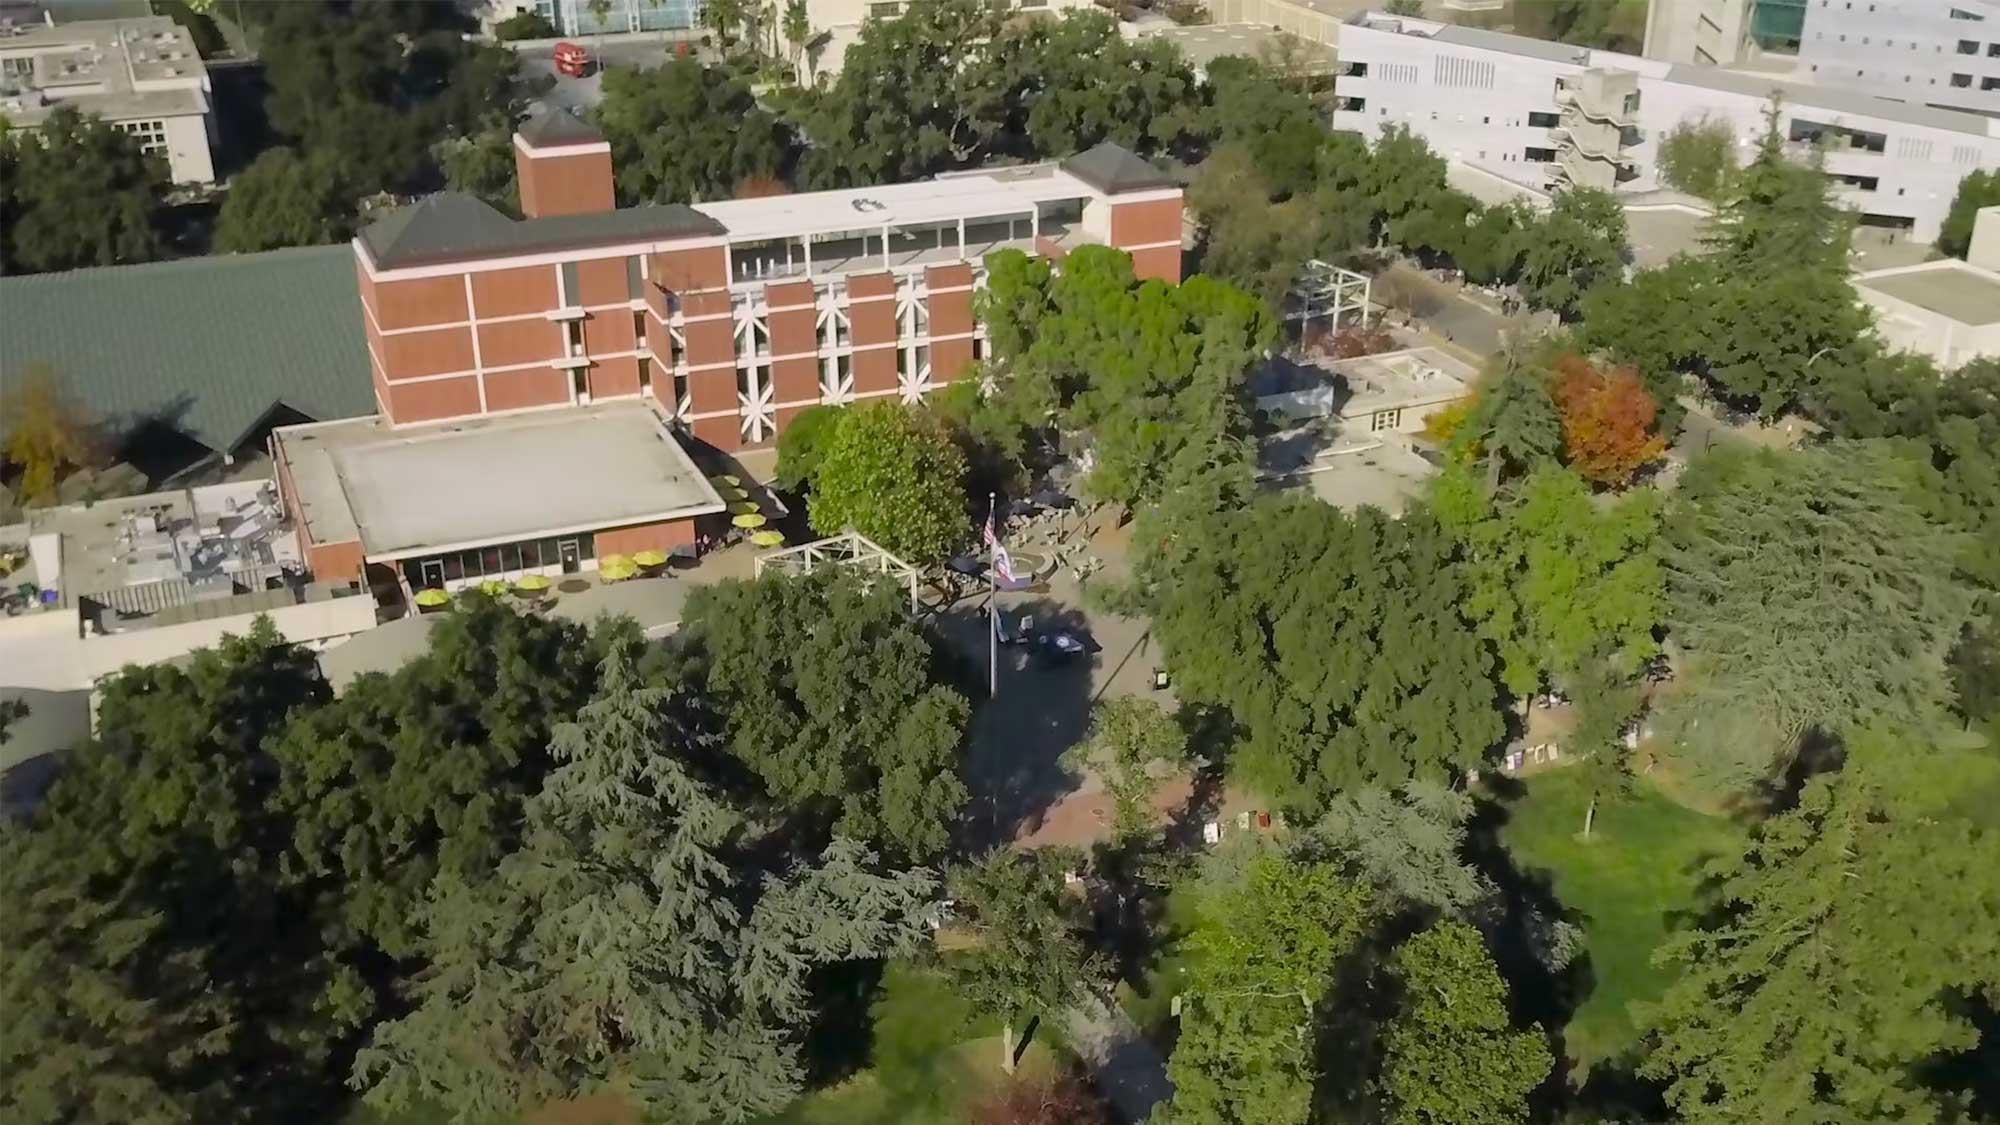 aerial view of the ϲʿͼ campus showing some buildings surrounded by trees